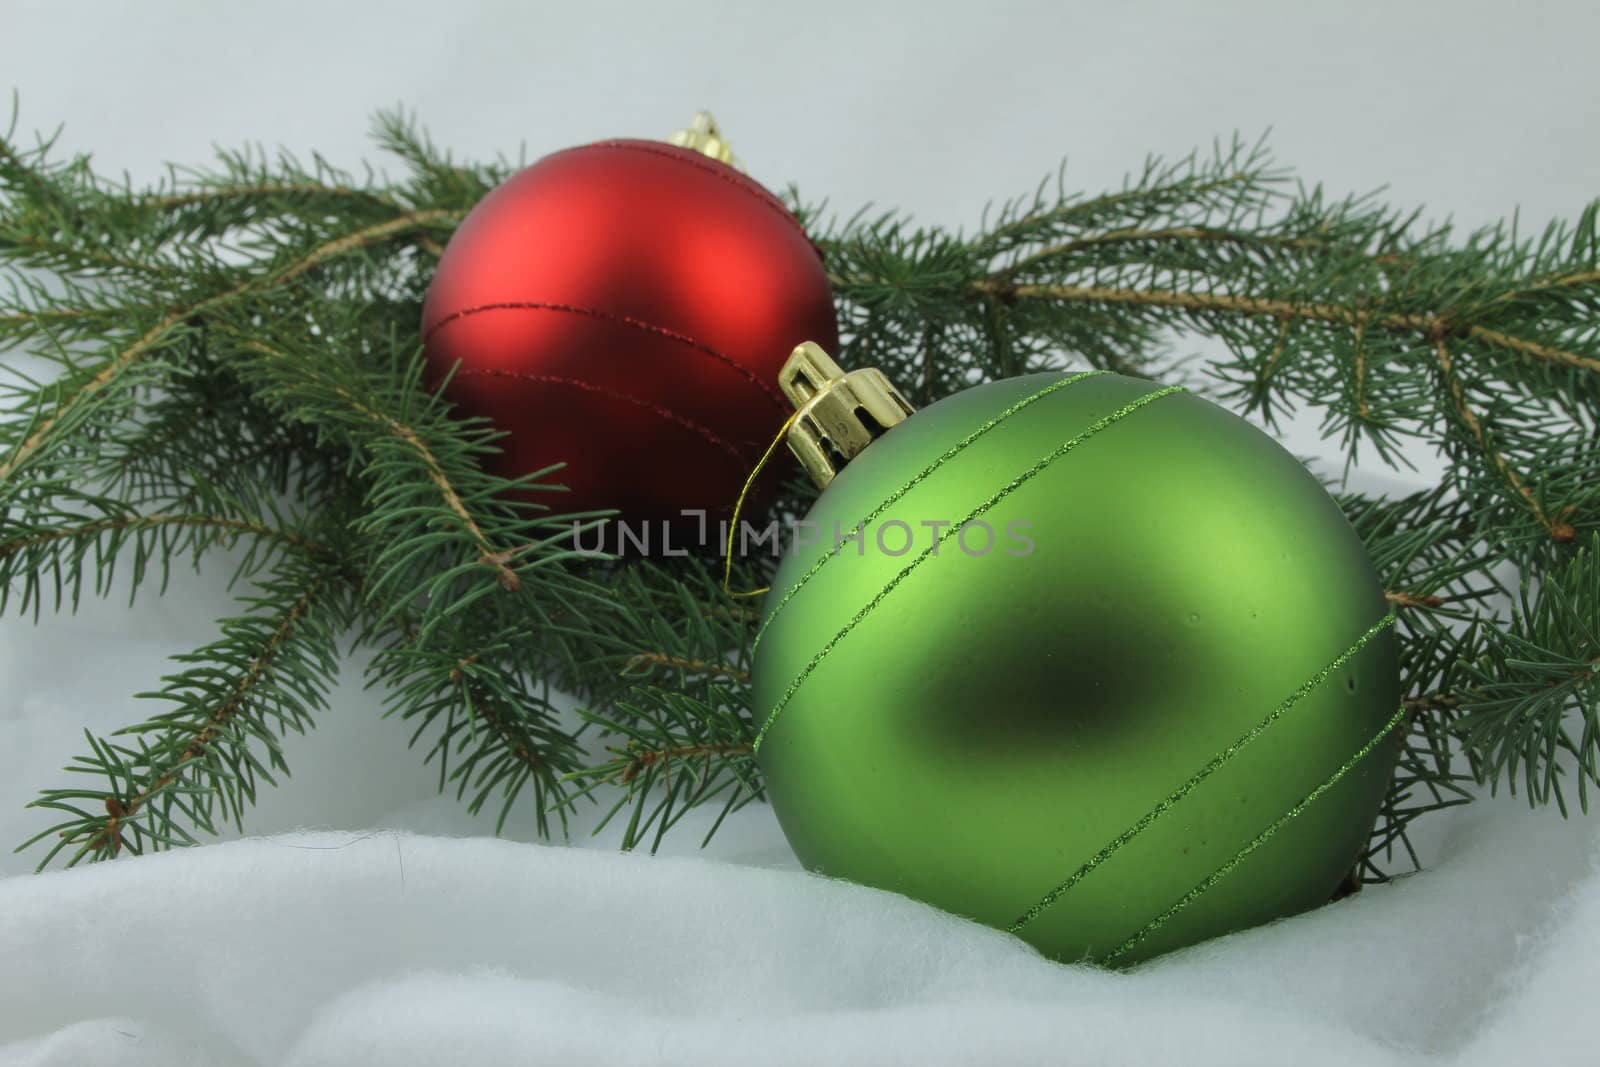 Red and green Christmas bulbs, with needles on white background
